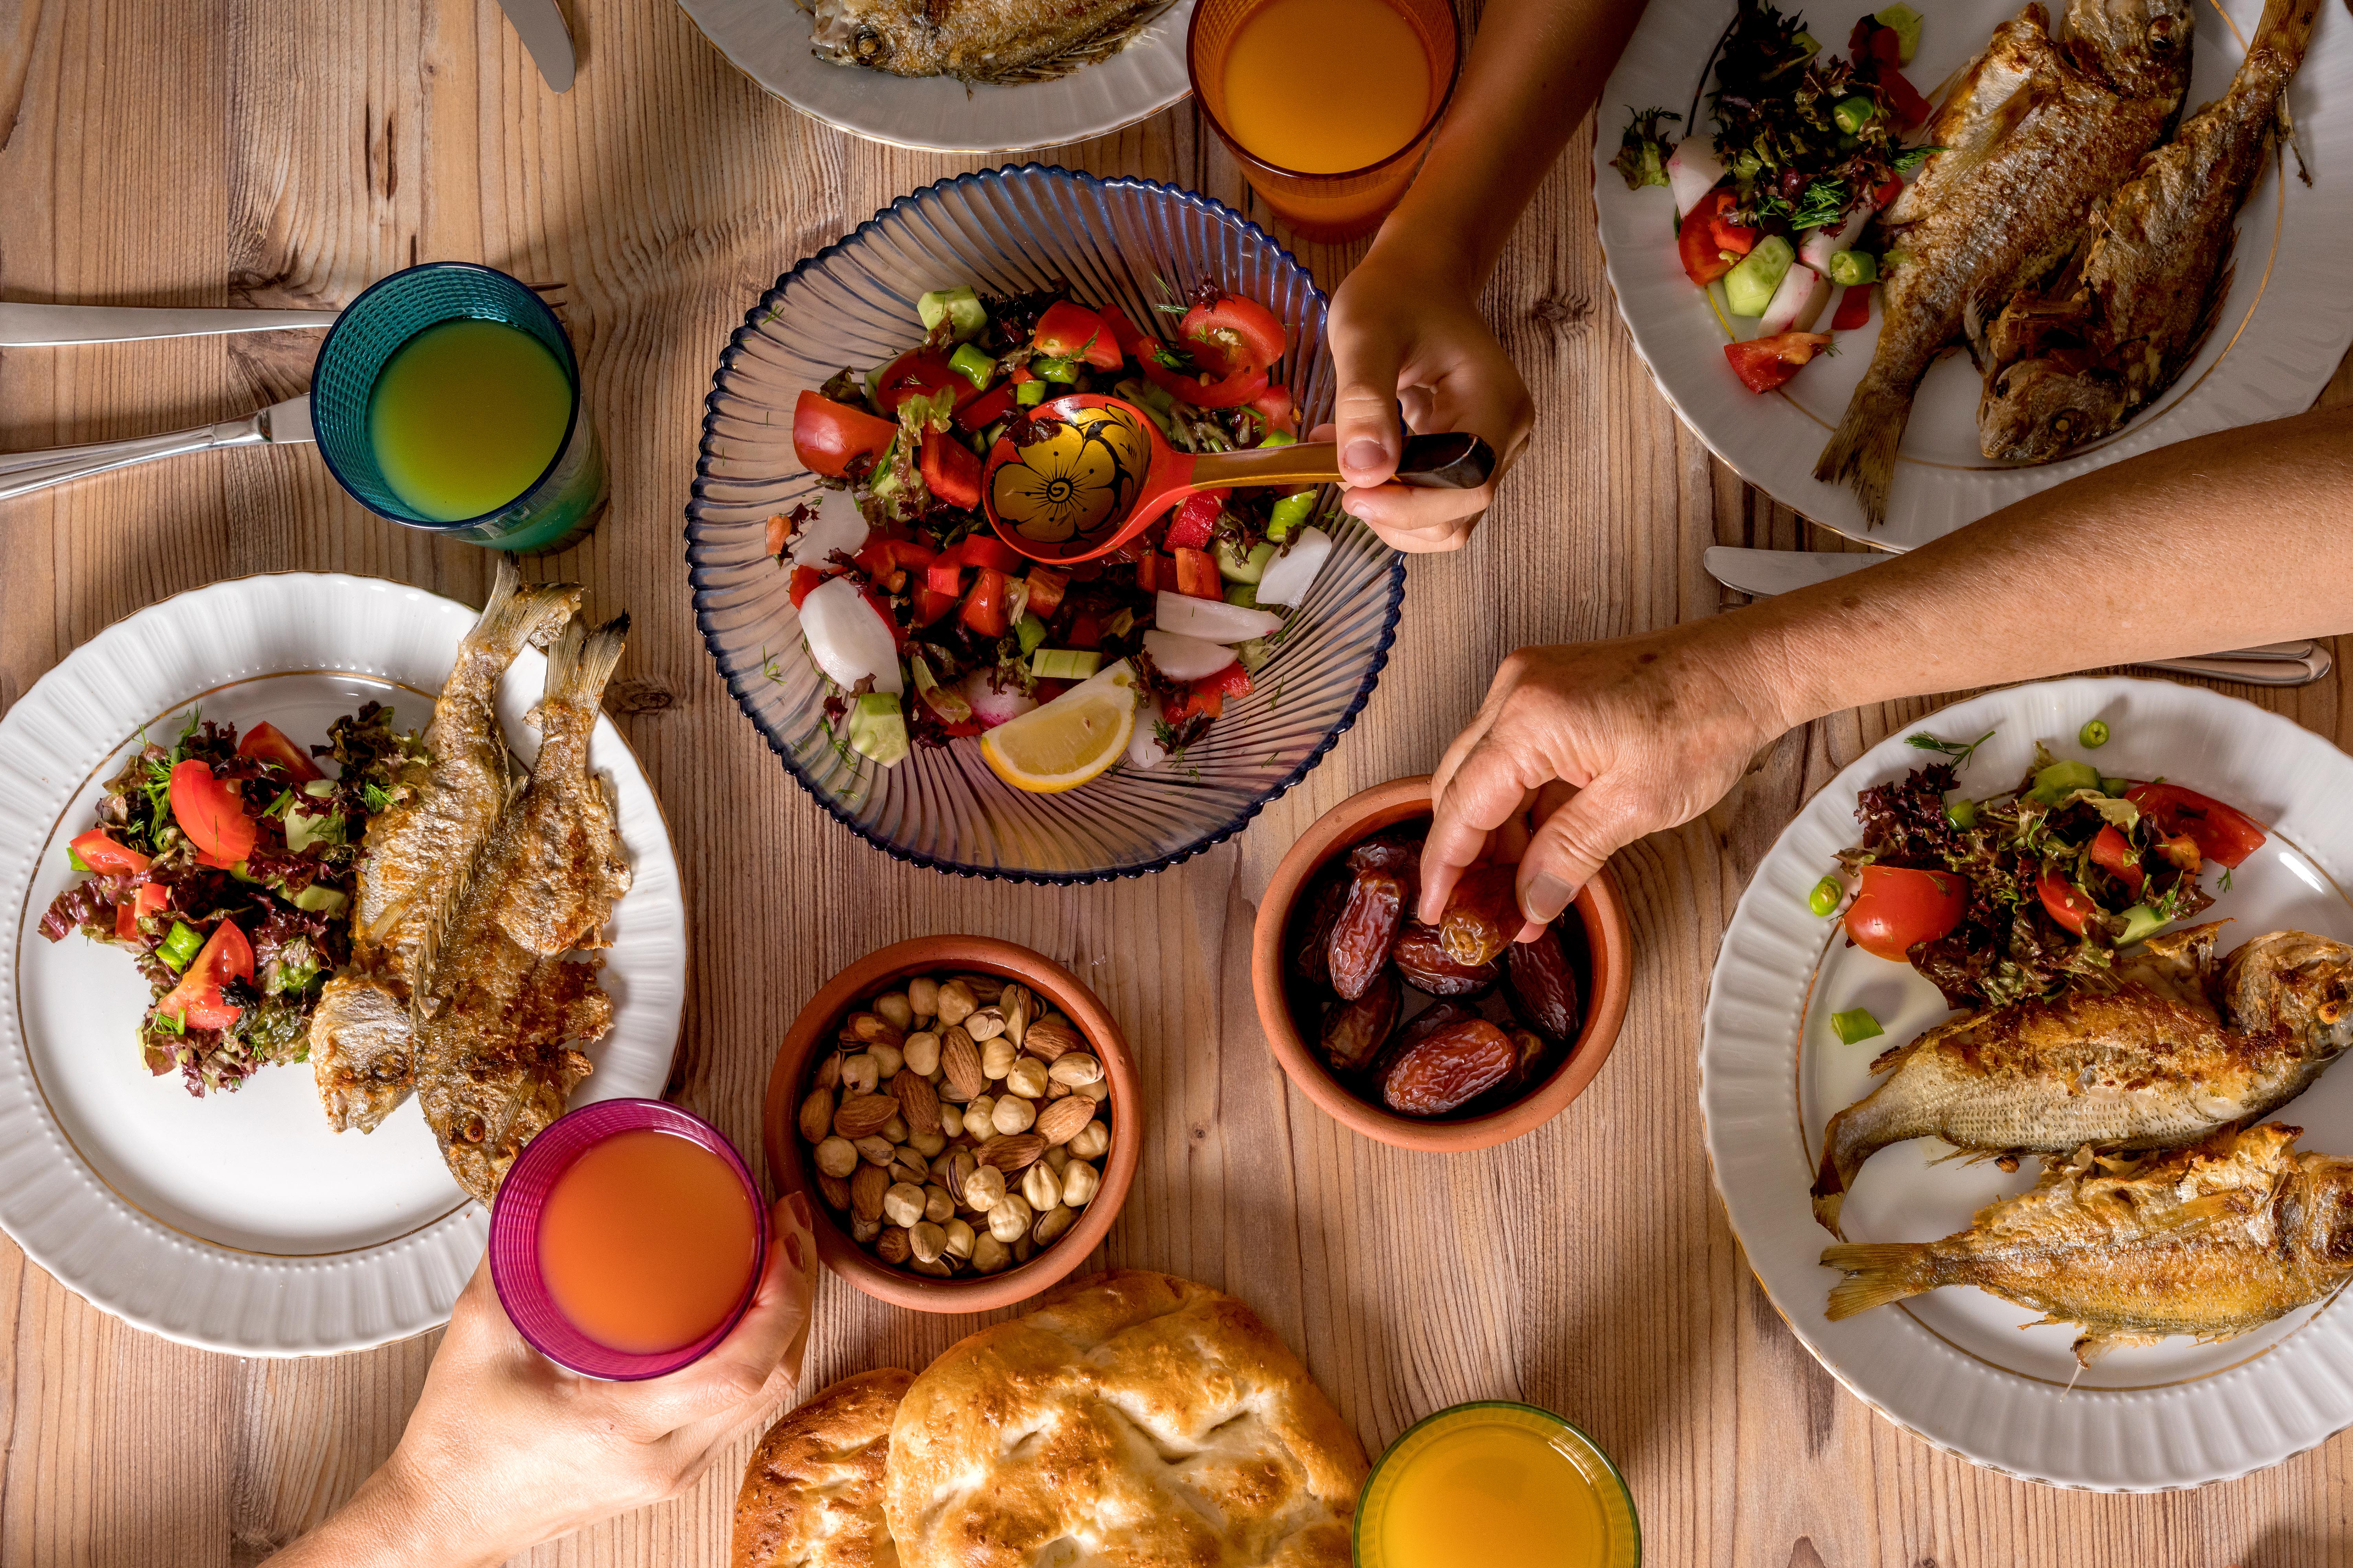 An overhead shot of an Iftar meal on a wooden dining table. Hands reach in from the top, right, and bottom to grab dates, mix a salad, and hold a cup.